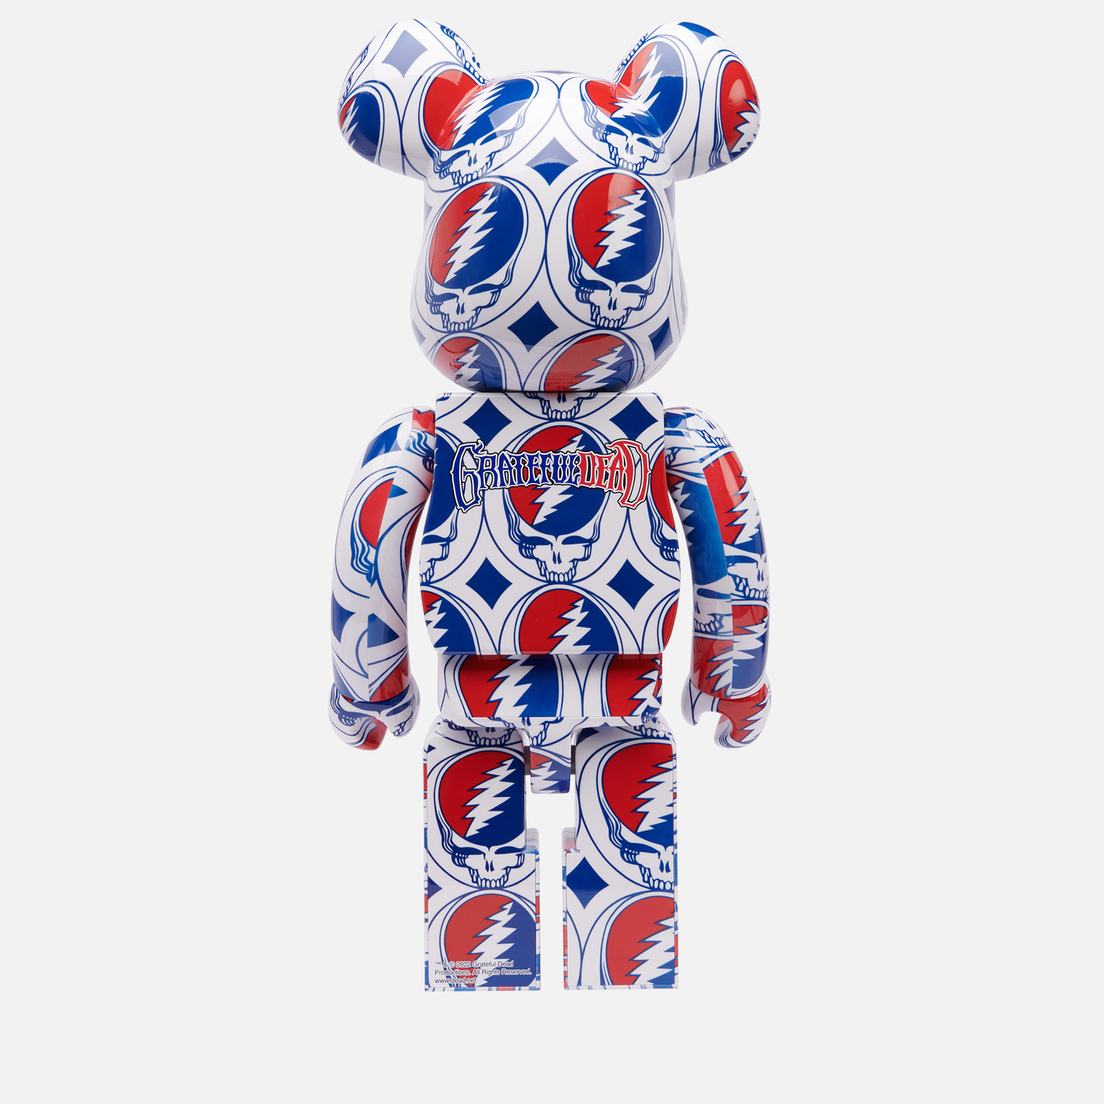 Medicom Toy Игрушка Grateful Dead Steal Your Face 1000%